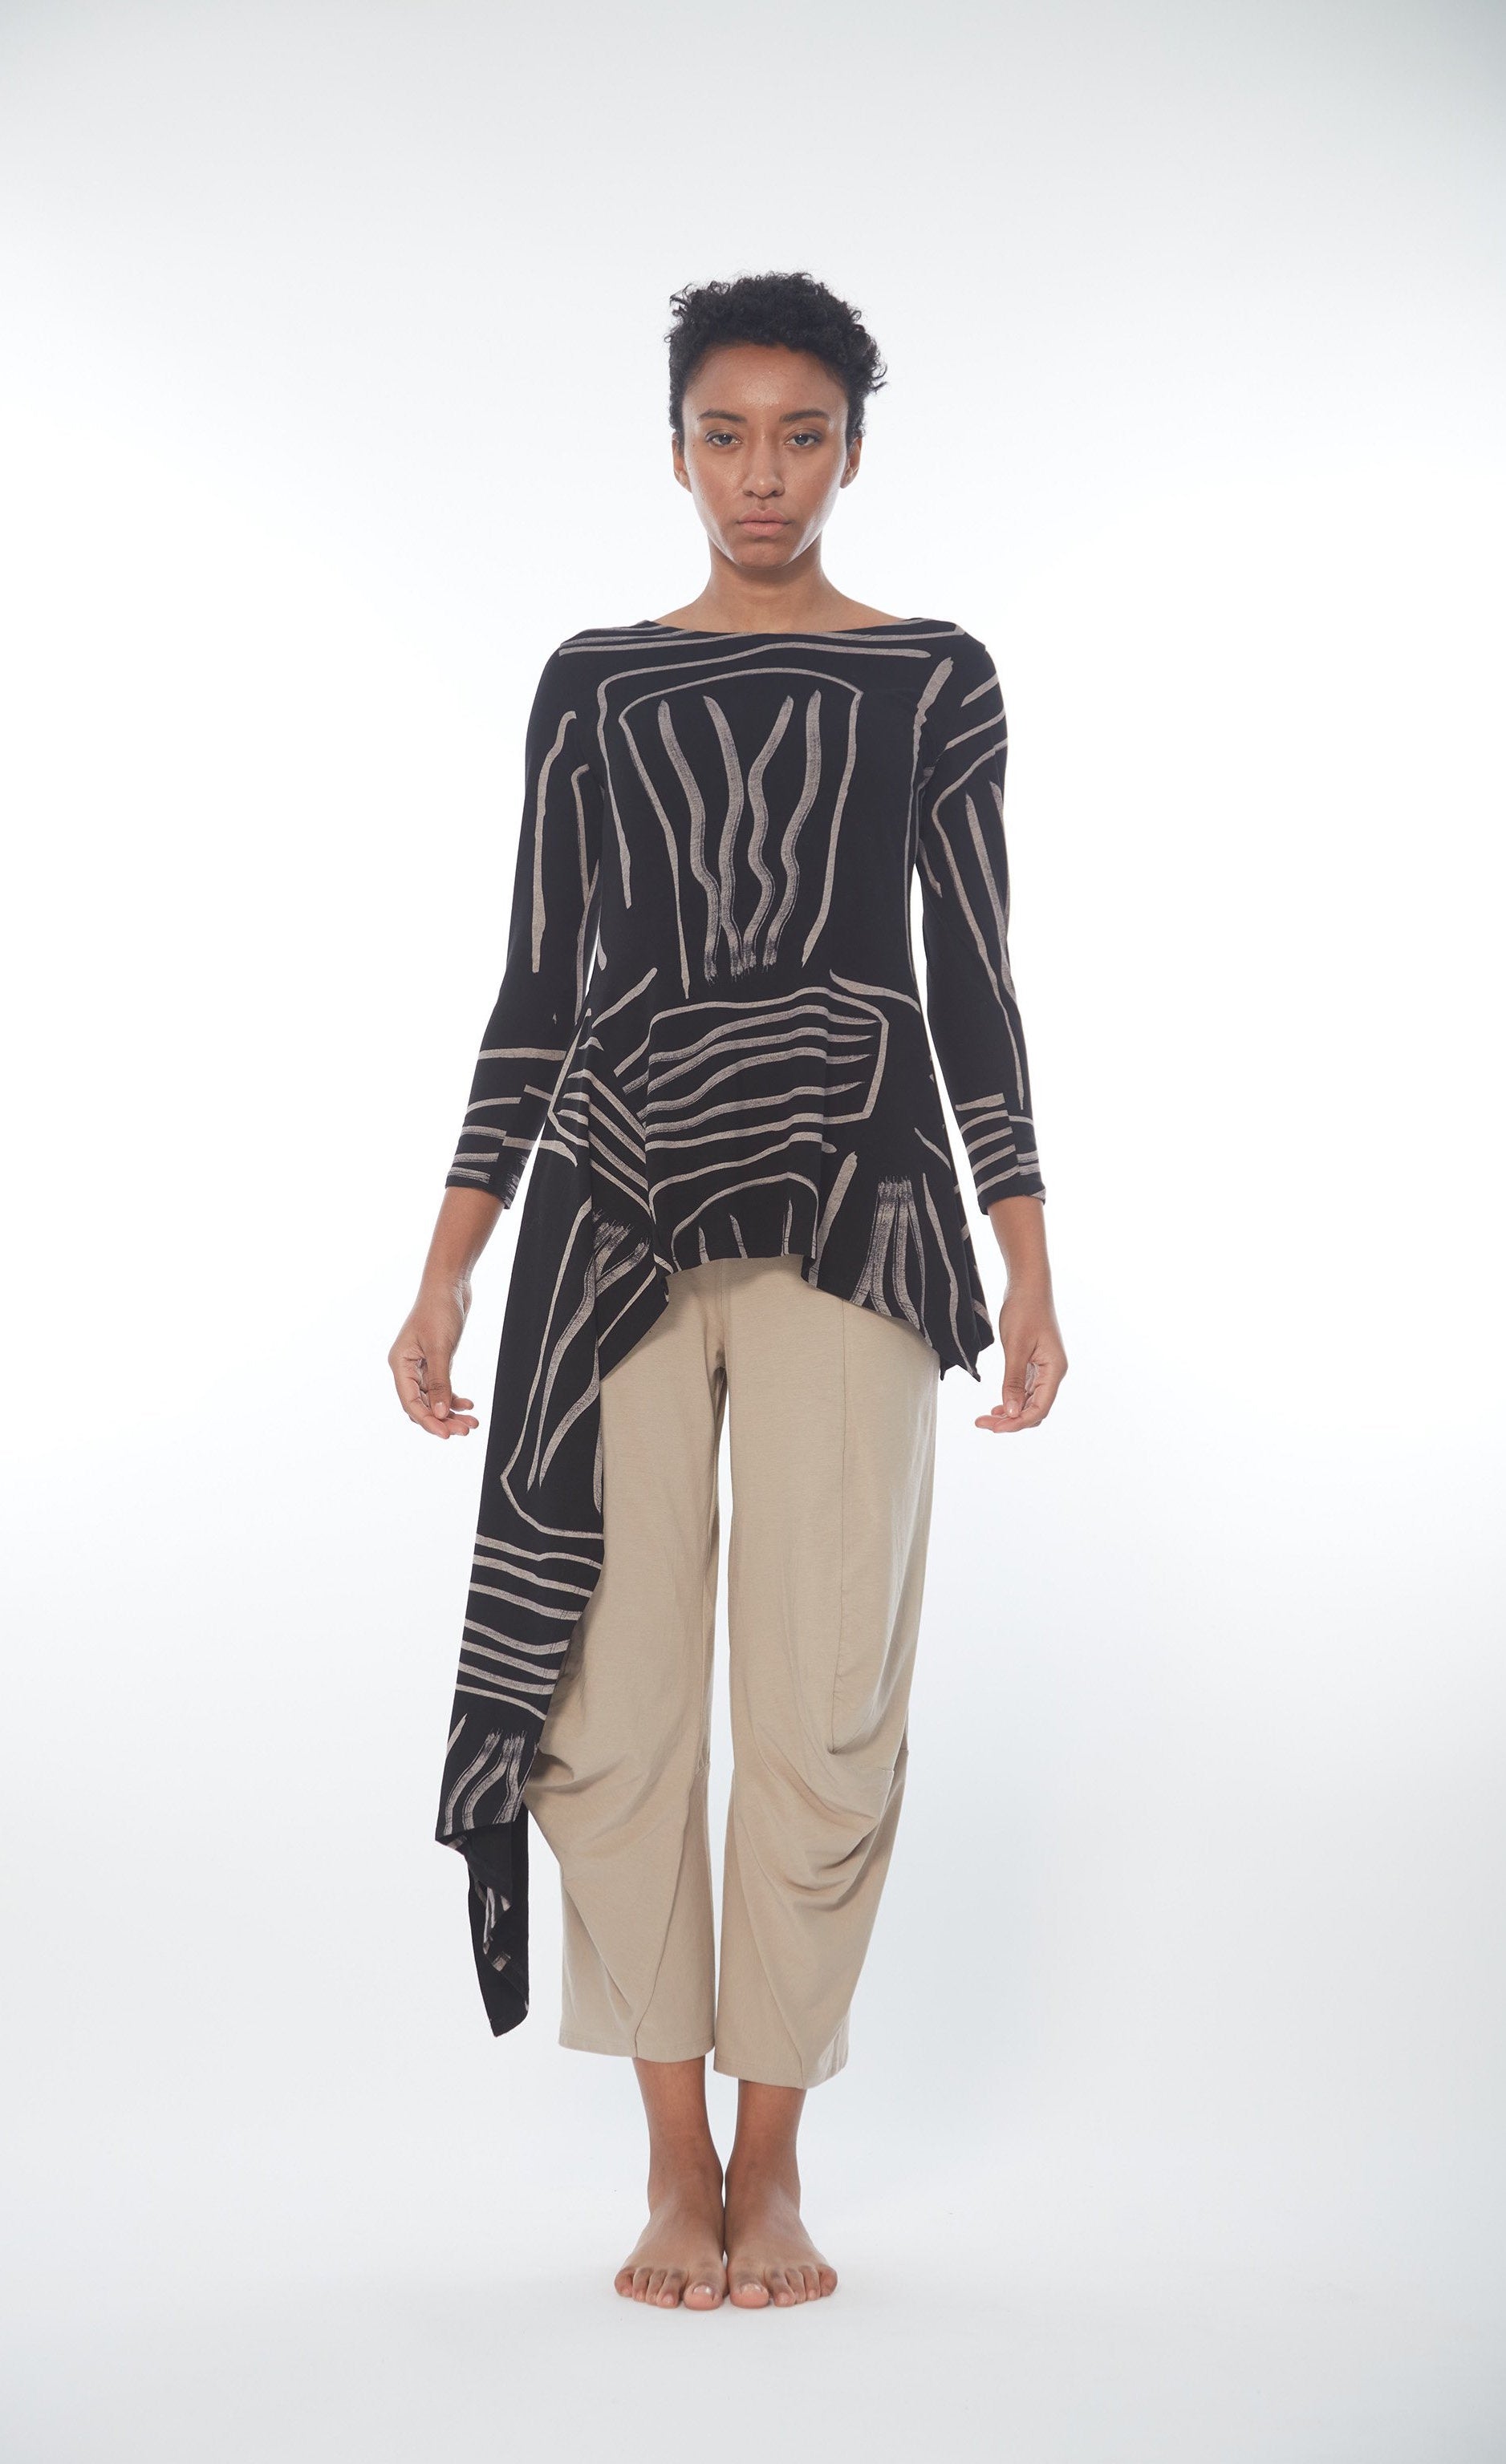 Front full body view of a woman wearing the Matthildur Safari Deck top. This top is black with an abstract taupe print on it. The shirt has 3/4 length sleeves, a boat neck, and a longer right side that goes down below the knees.